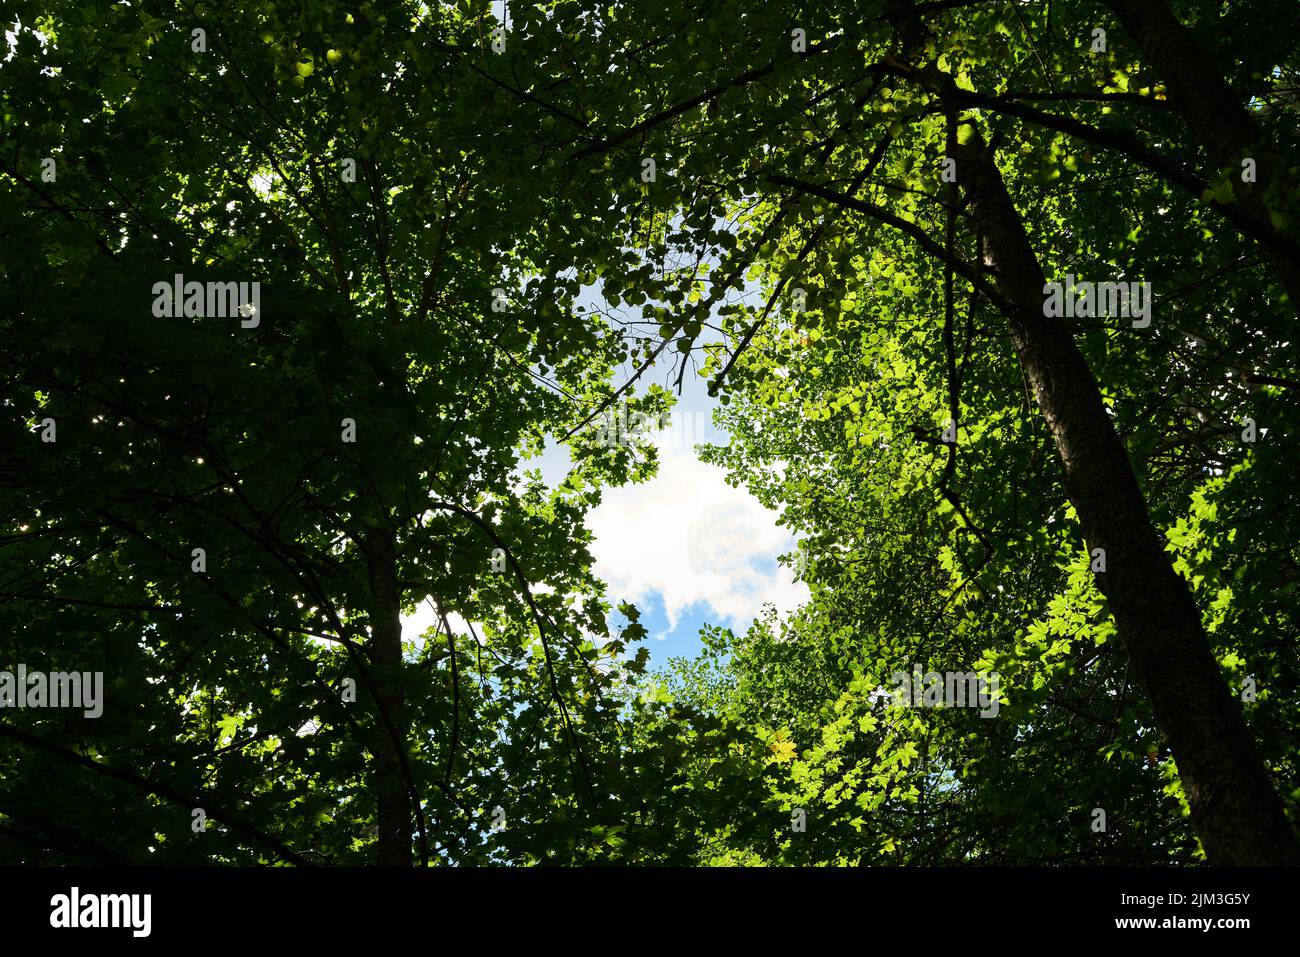 The sky through the green leaves of trees.Natural background. Stock Photo